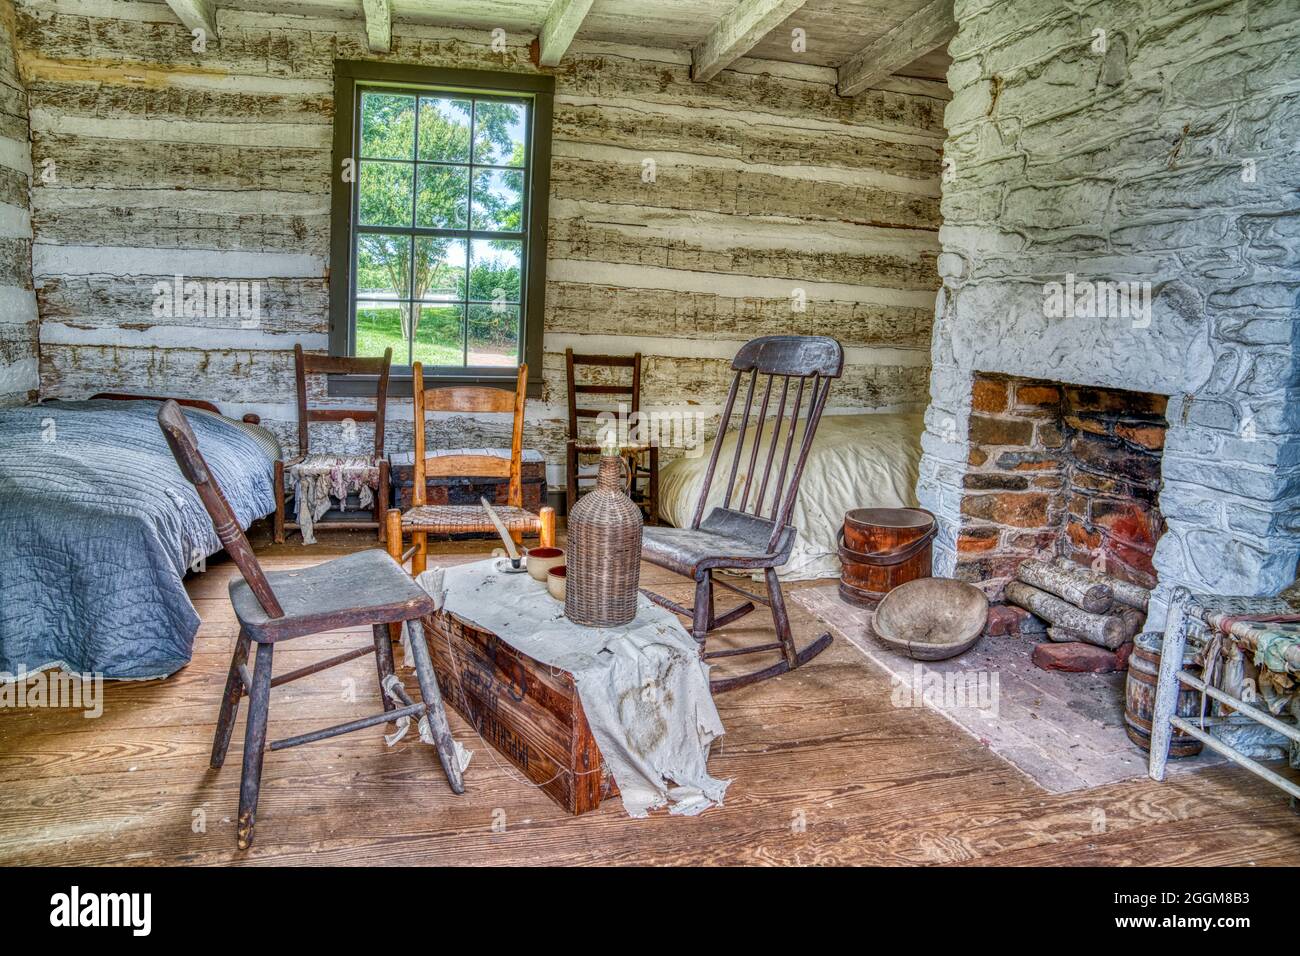 The interior of the slave quarters of the McLean House, site of Lee’s Surrender to Grant, at the Appomattox Court House National Historical Park in Vi Stock Photo